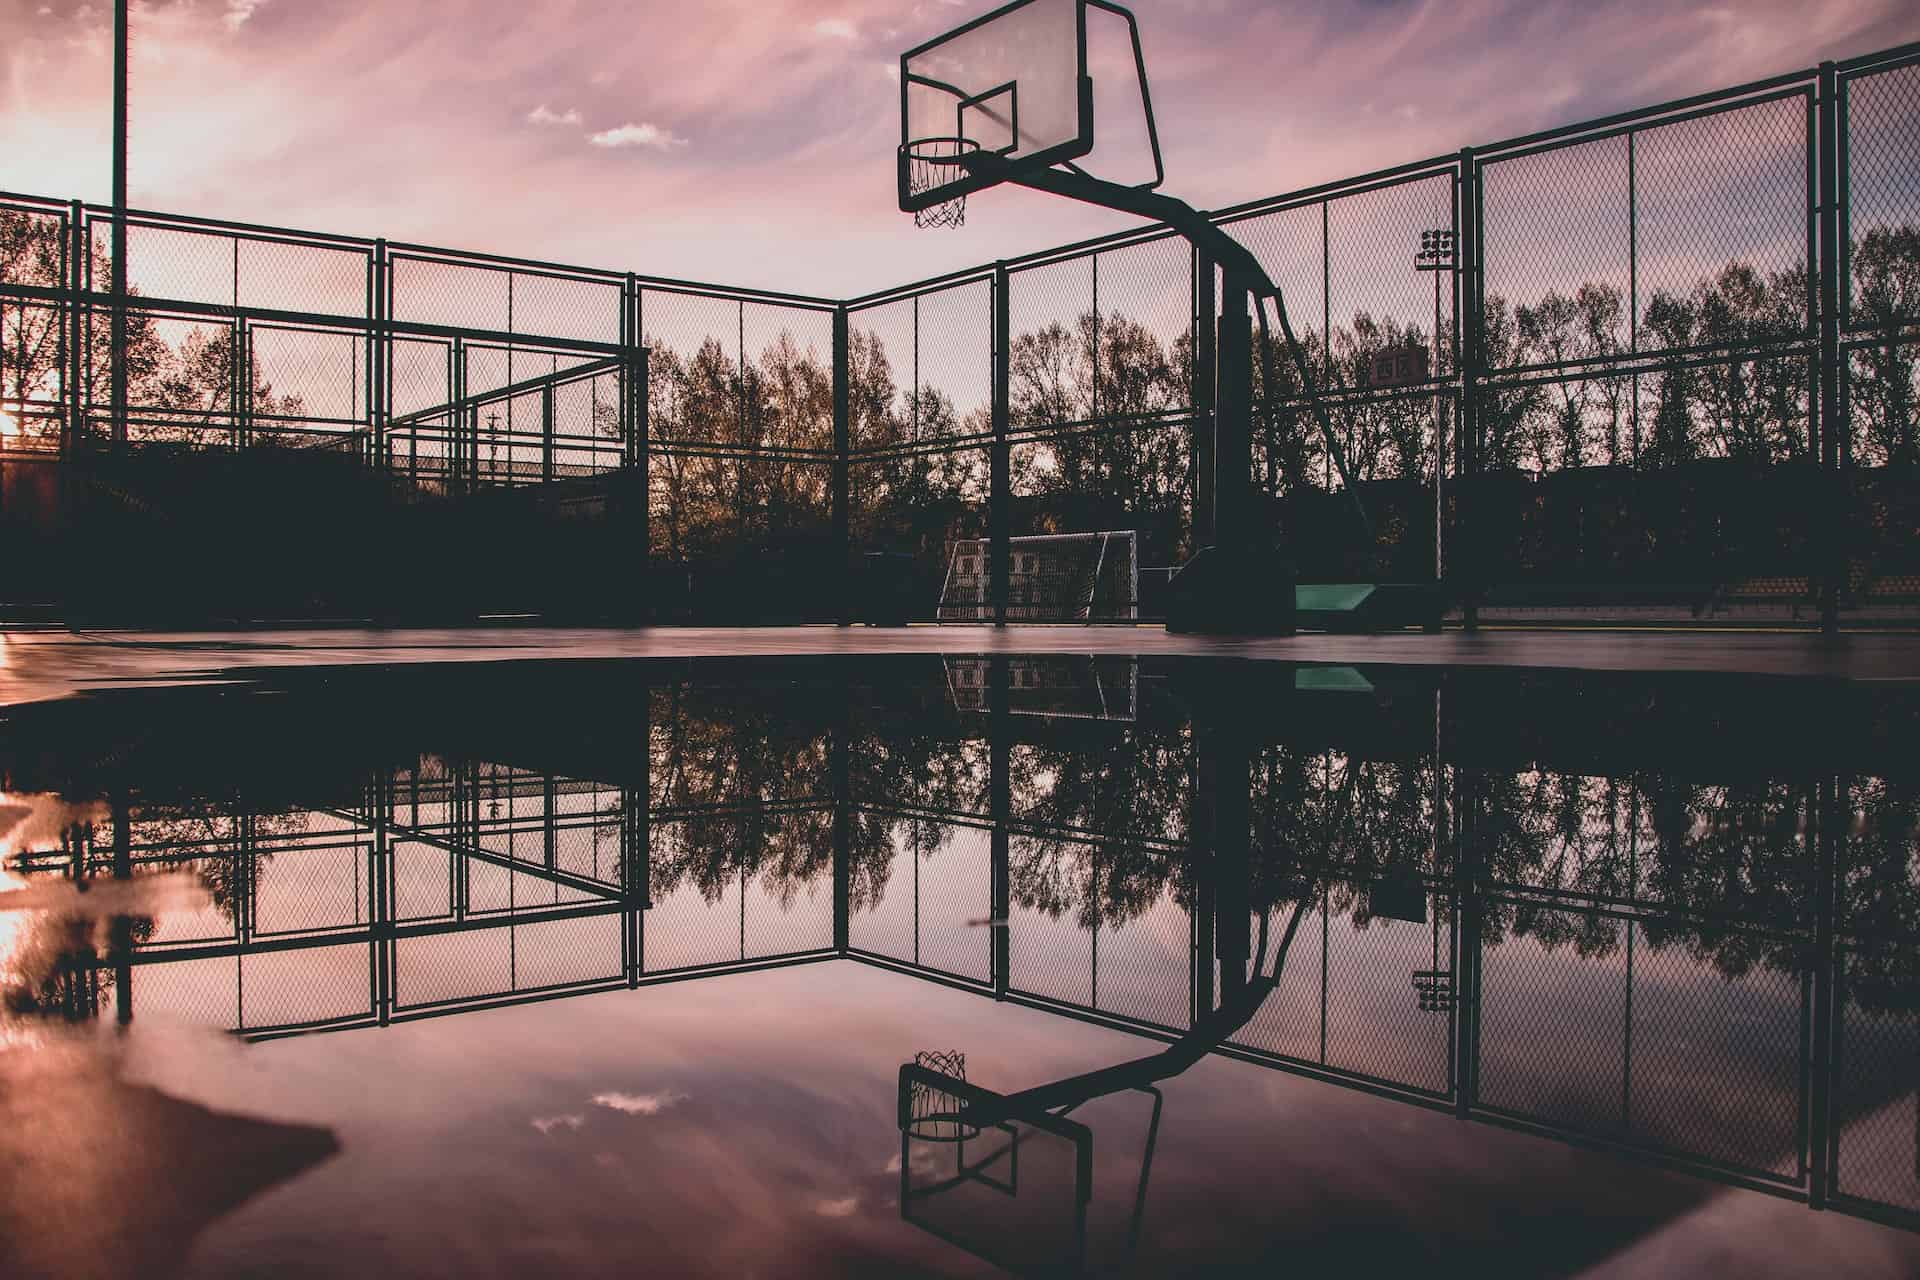 how to get started with basketball?